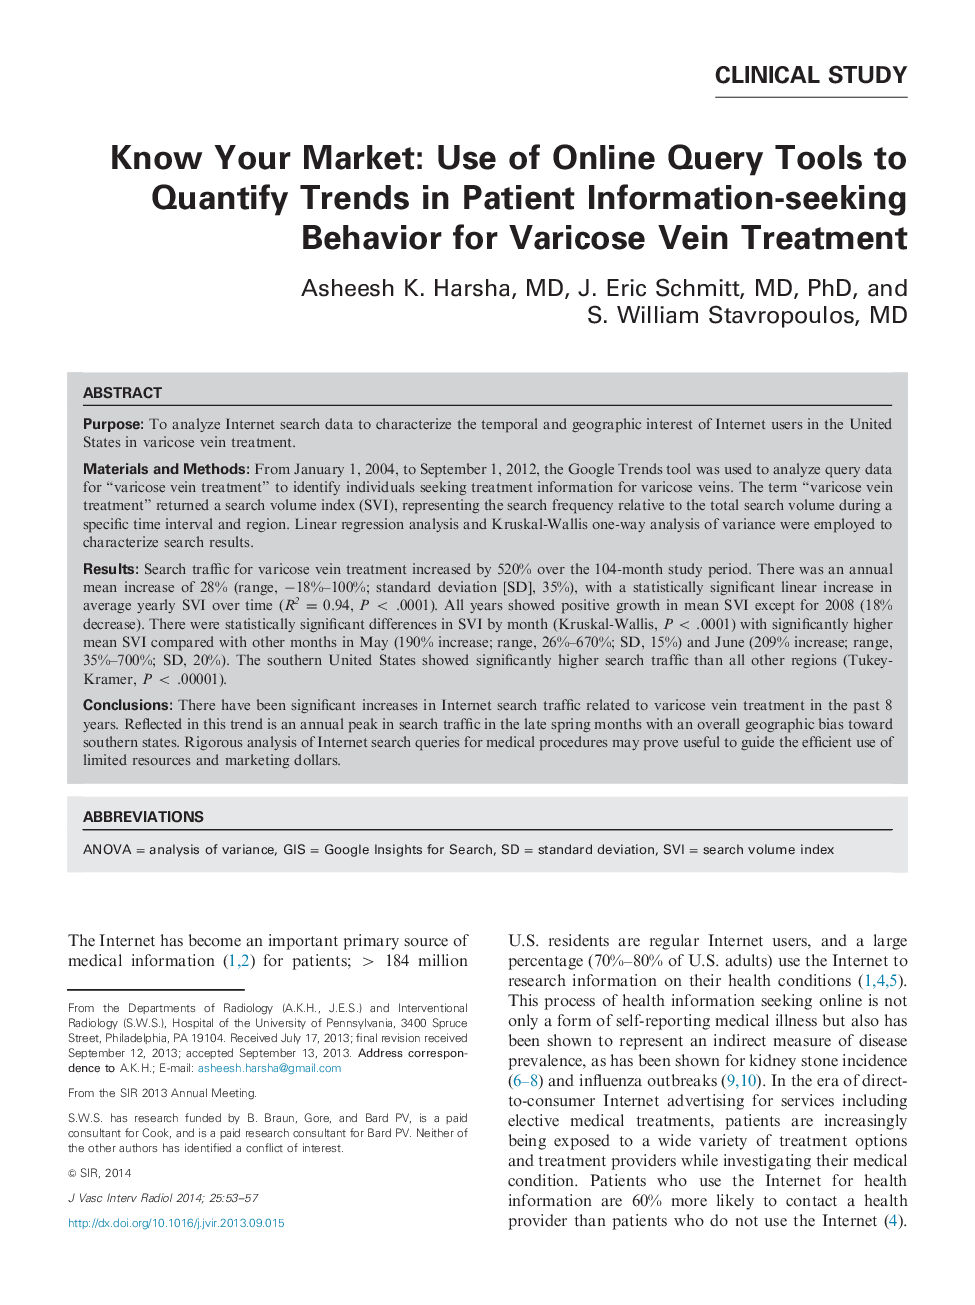 Know Your Market: Use of Online Query Tools to Quantify Trends in Patient Information-seeking Behavior for Varicose Vein Treatment